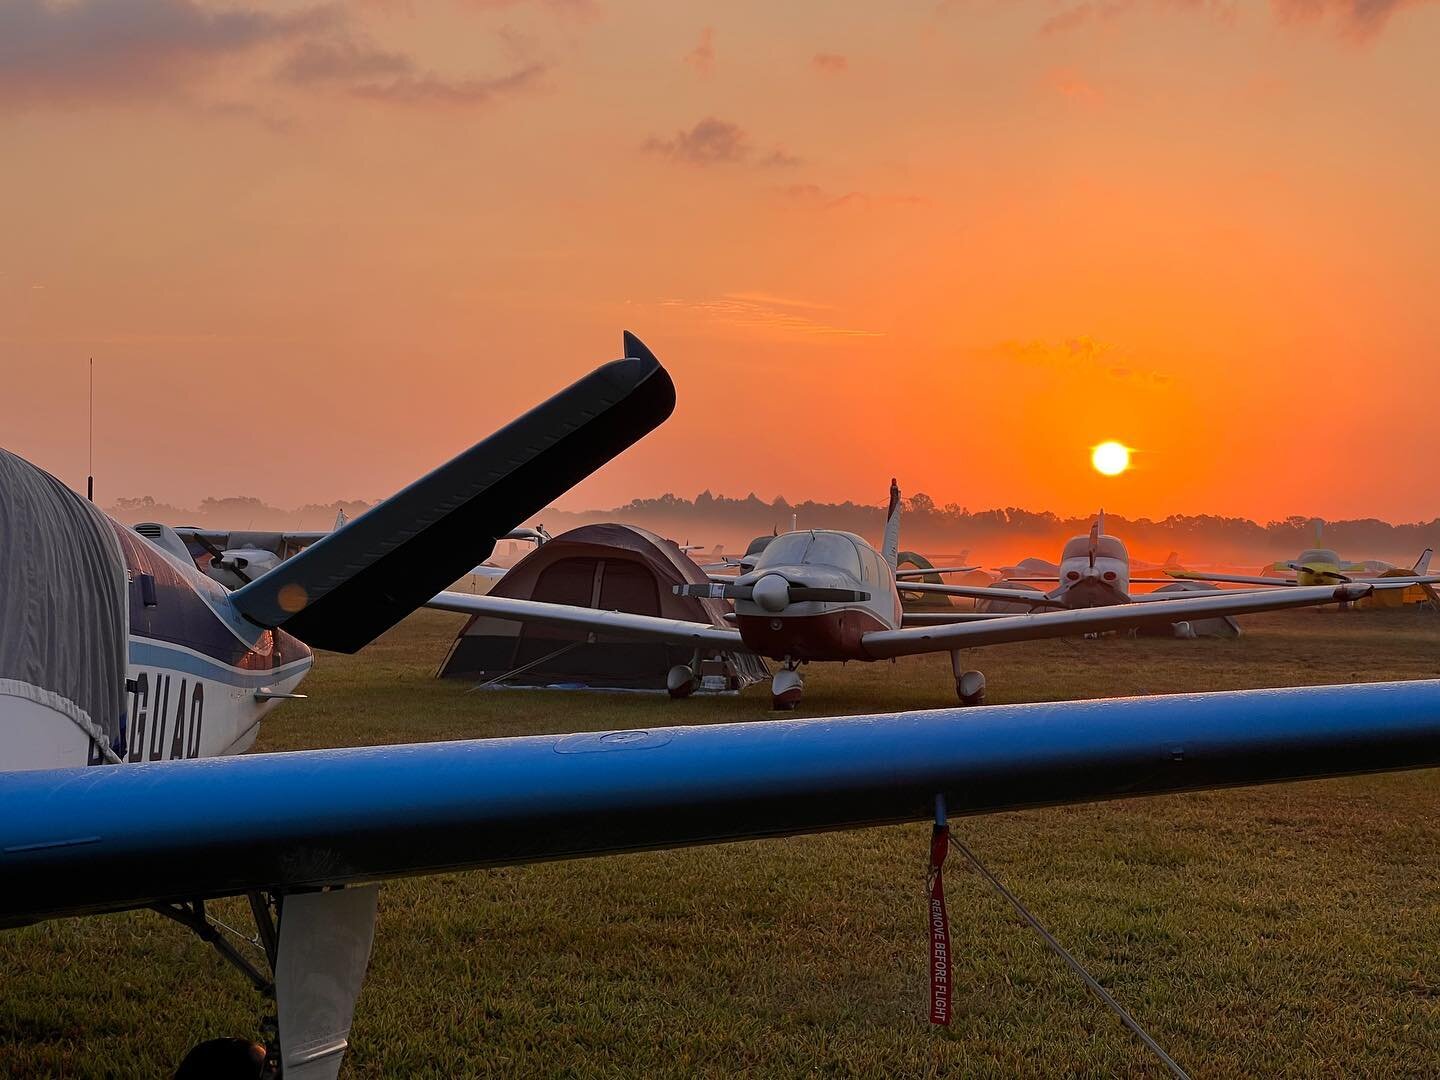 Sun &rsquo;n Fun 2023 was a blast! Spoke with many other aviation enthusiasts about the world flight and the motivation behind it!   Next up is the WORLDS LARGEST AIRSHOW with over 1 million in attendance - Air Venture *Oshkosh* - This will be the we